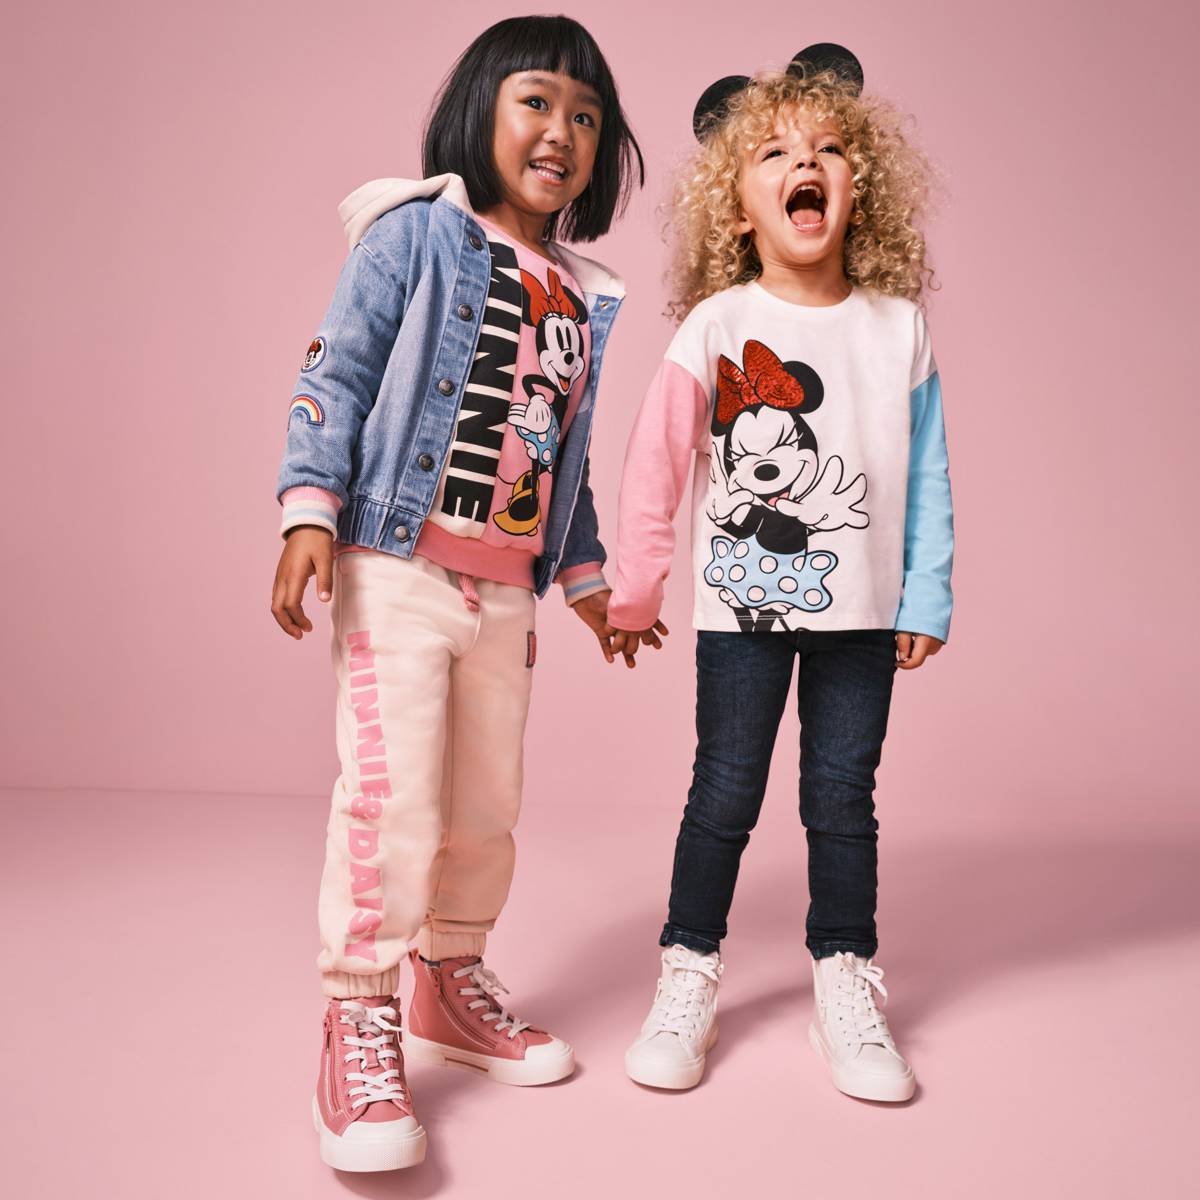 Kids wearing pink Minnie Mouse™ clothing. Shop the Character Shop